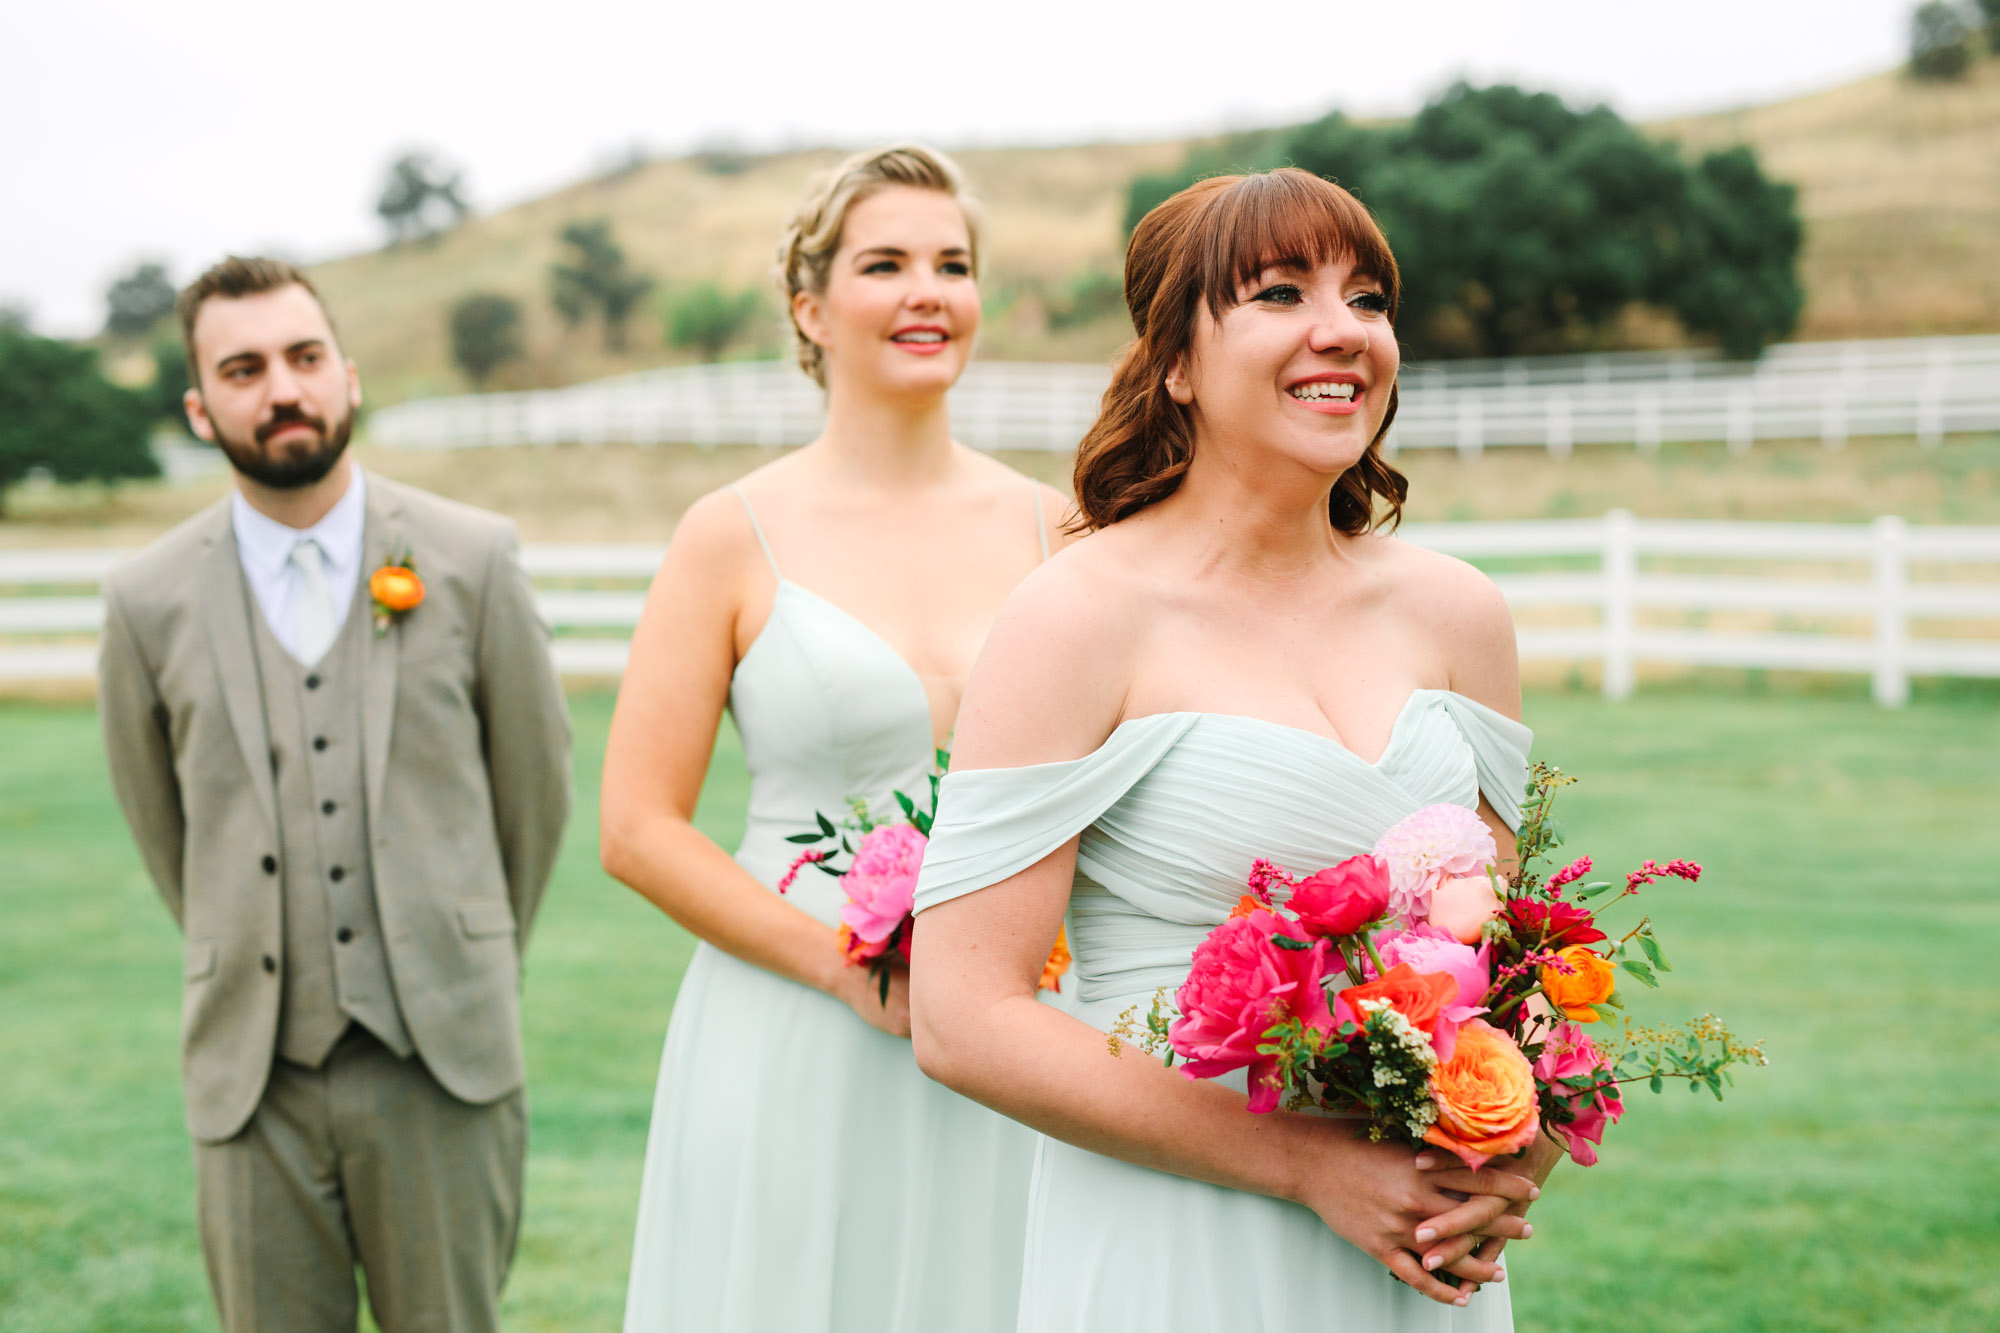 Joyful wedding party by by Mary Costa Photography